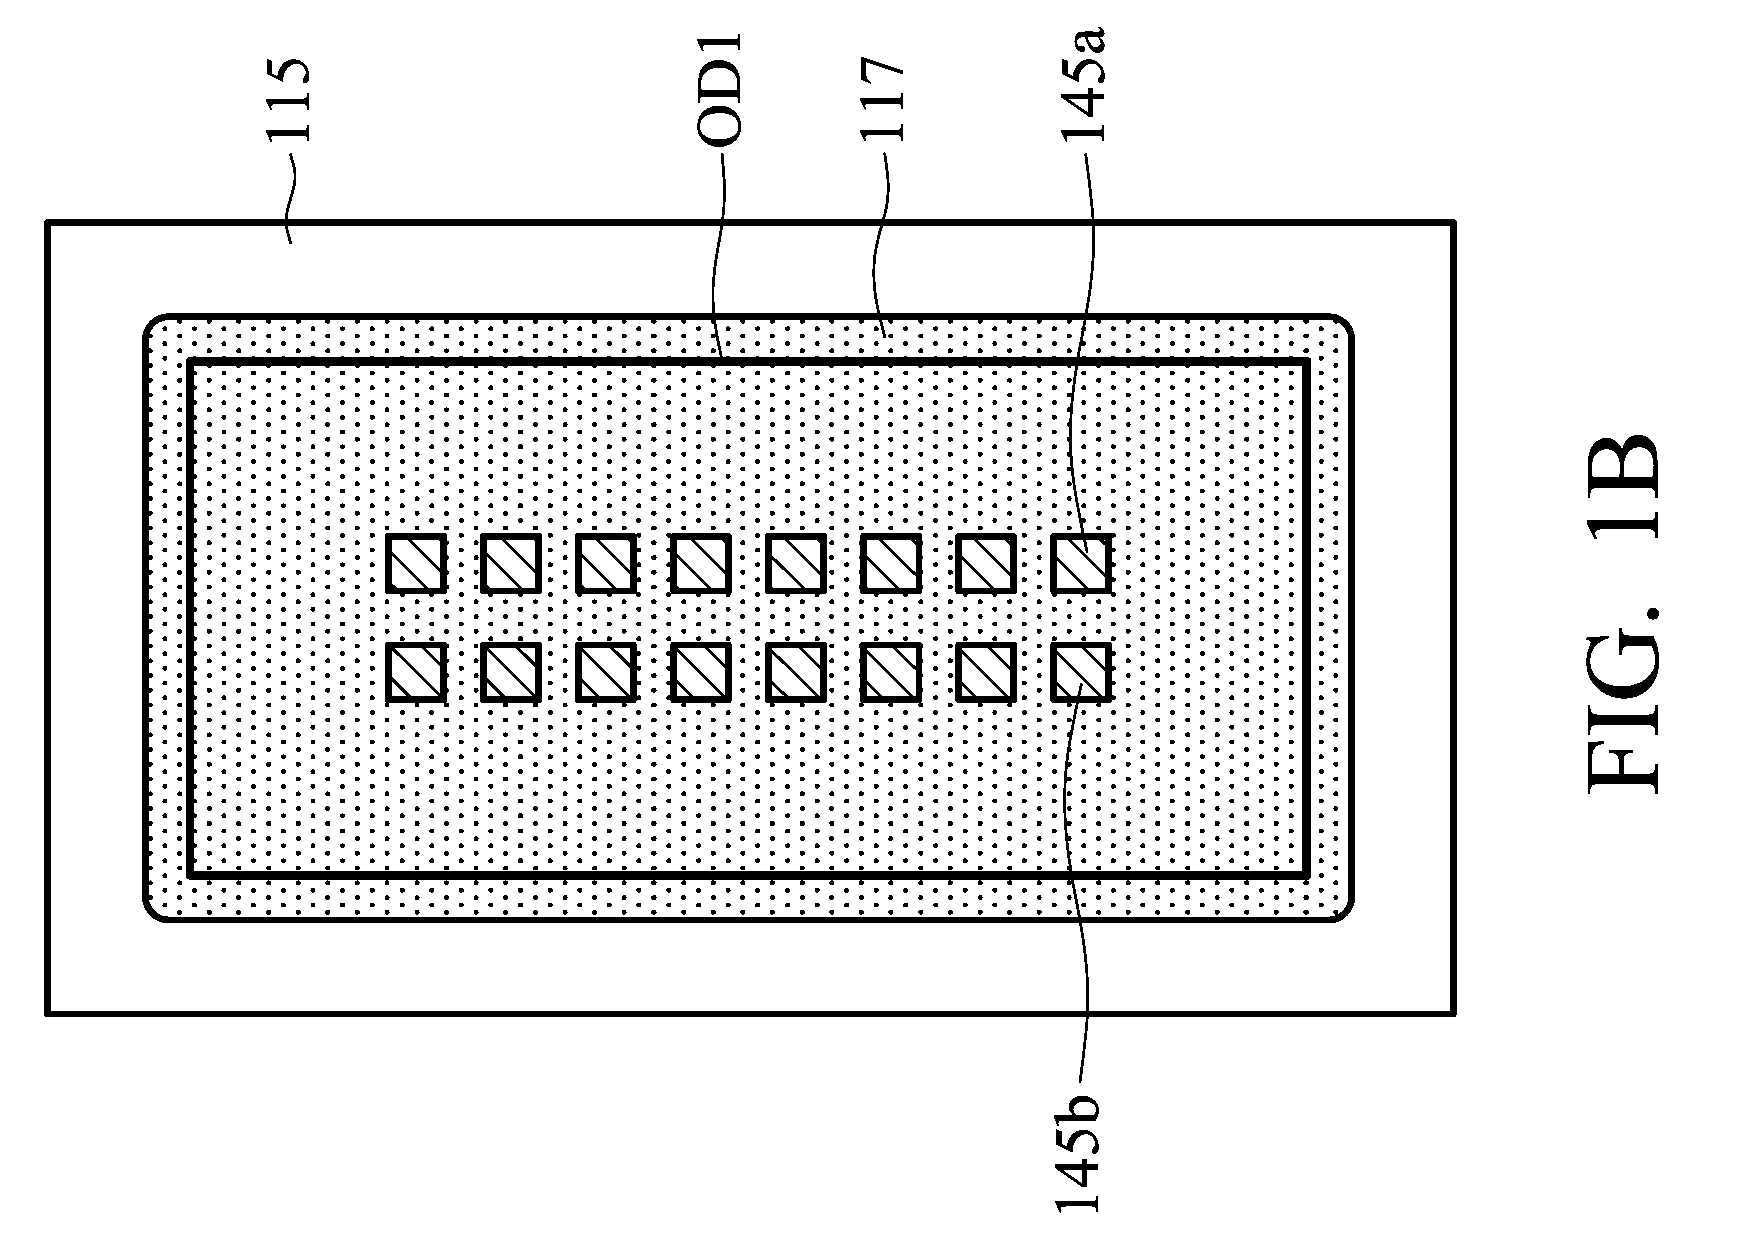 Insulated gate bipolar transistor (IGBT) electrostatic discharge (ESD) protection devices